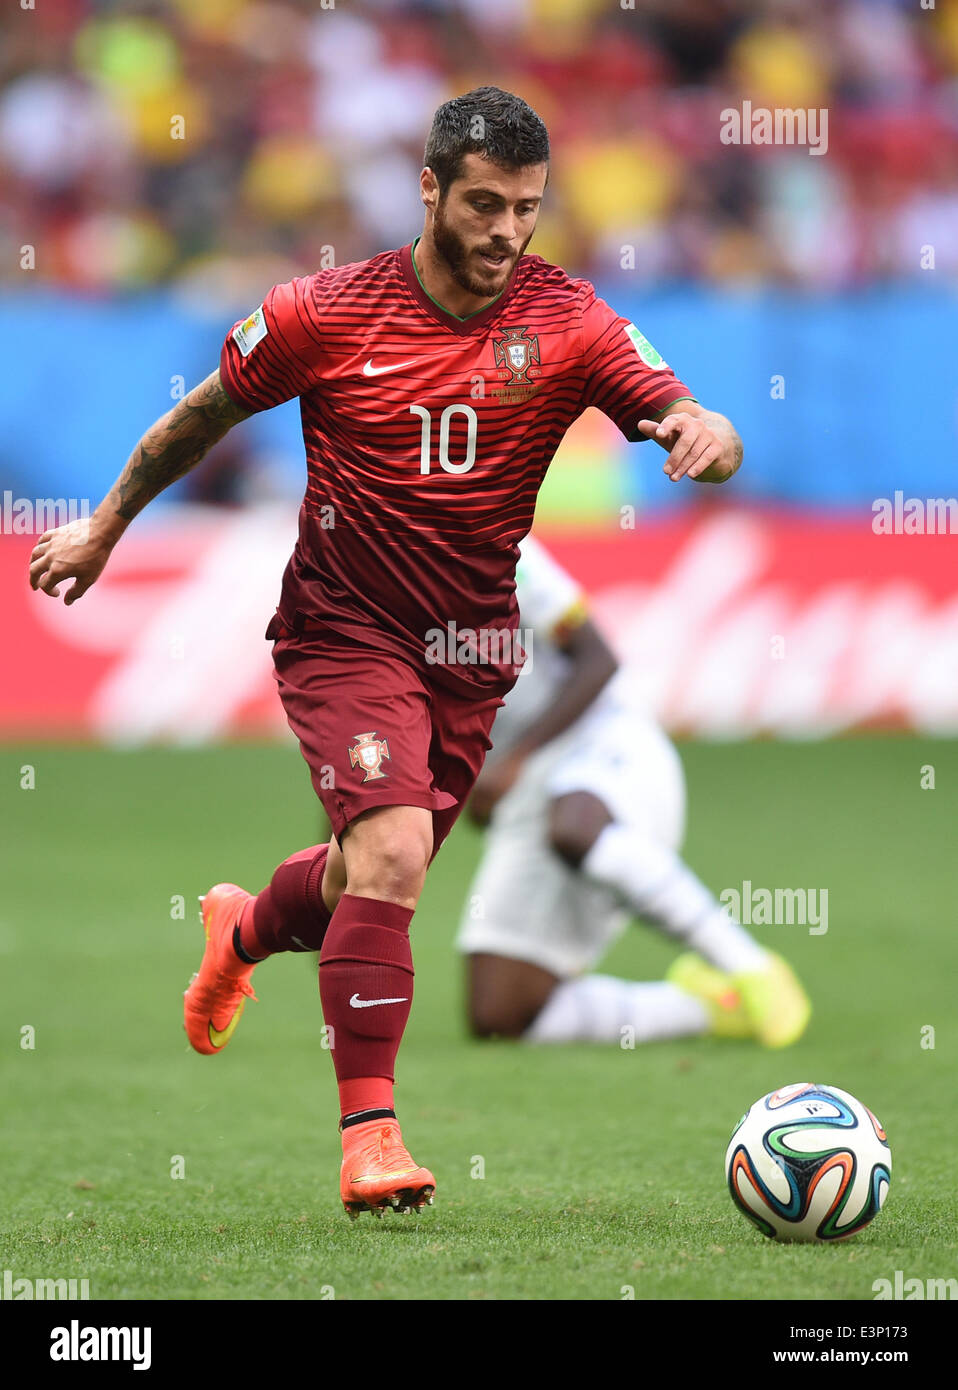 Brasilia, Brazil. 26th June, 2014. Vieirinha of Portugal in action during the FIFA World Cup 2014 group G preliminary round match between Portugal and Ghana at the Estadio National Stadium in Brasilia, Brazil, on 26 June 2014 Credit: © dpa picture alliance/Alamy Live News  Stock Photo